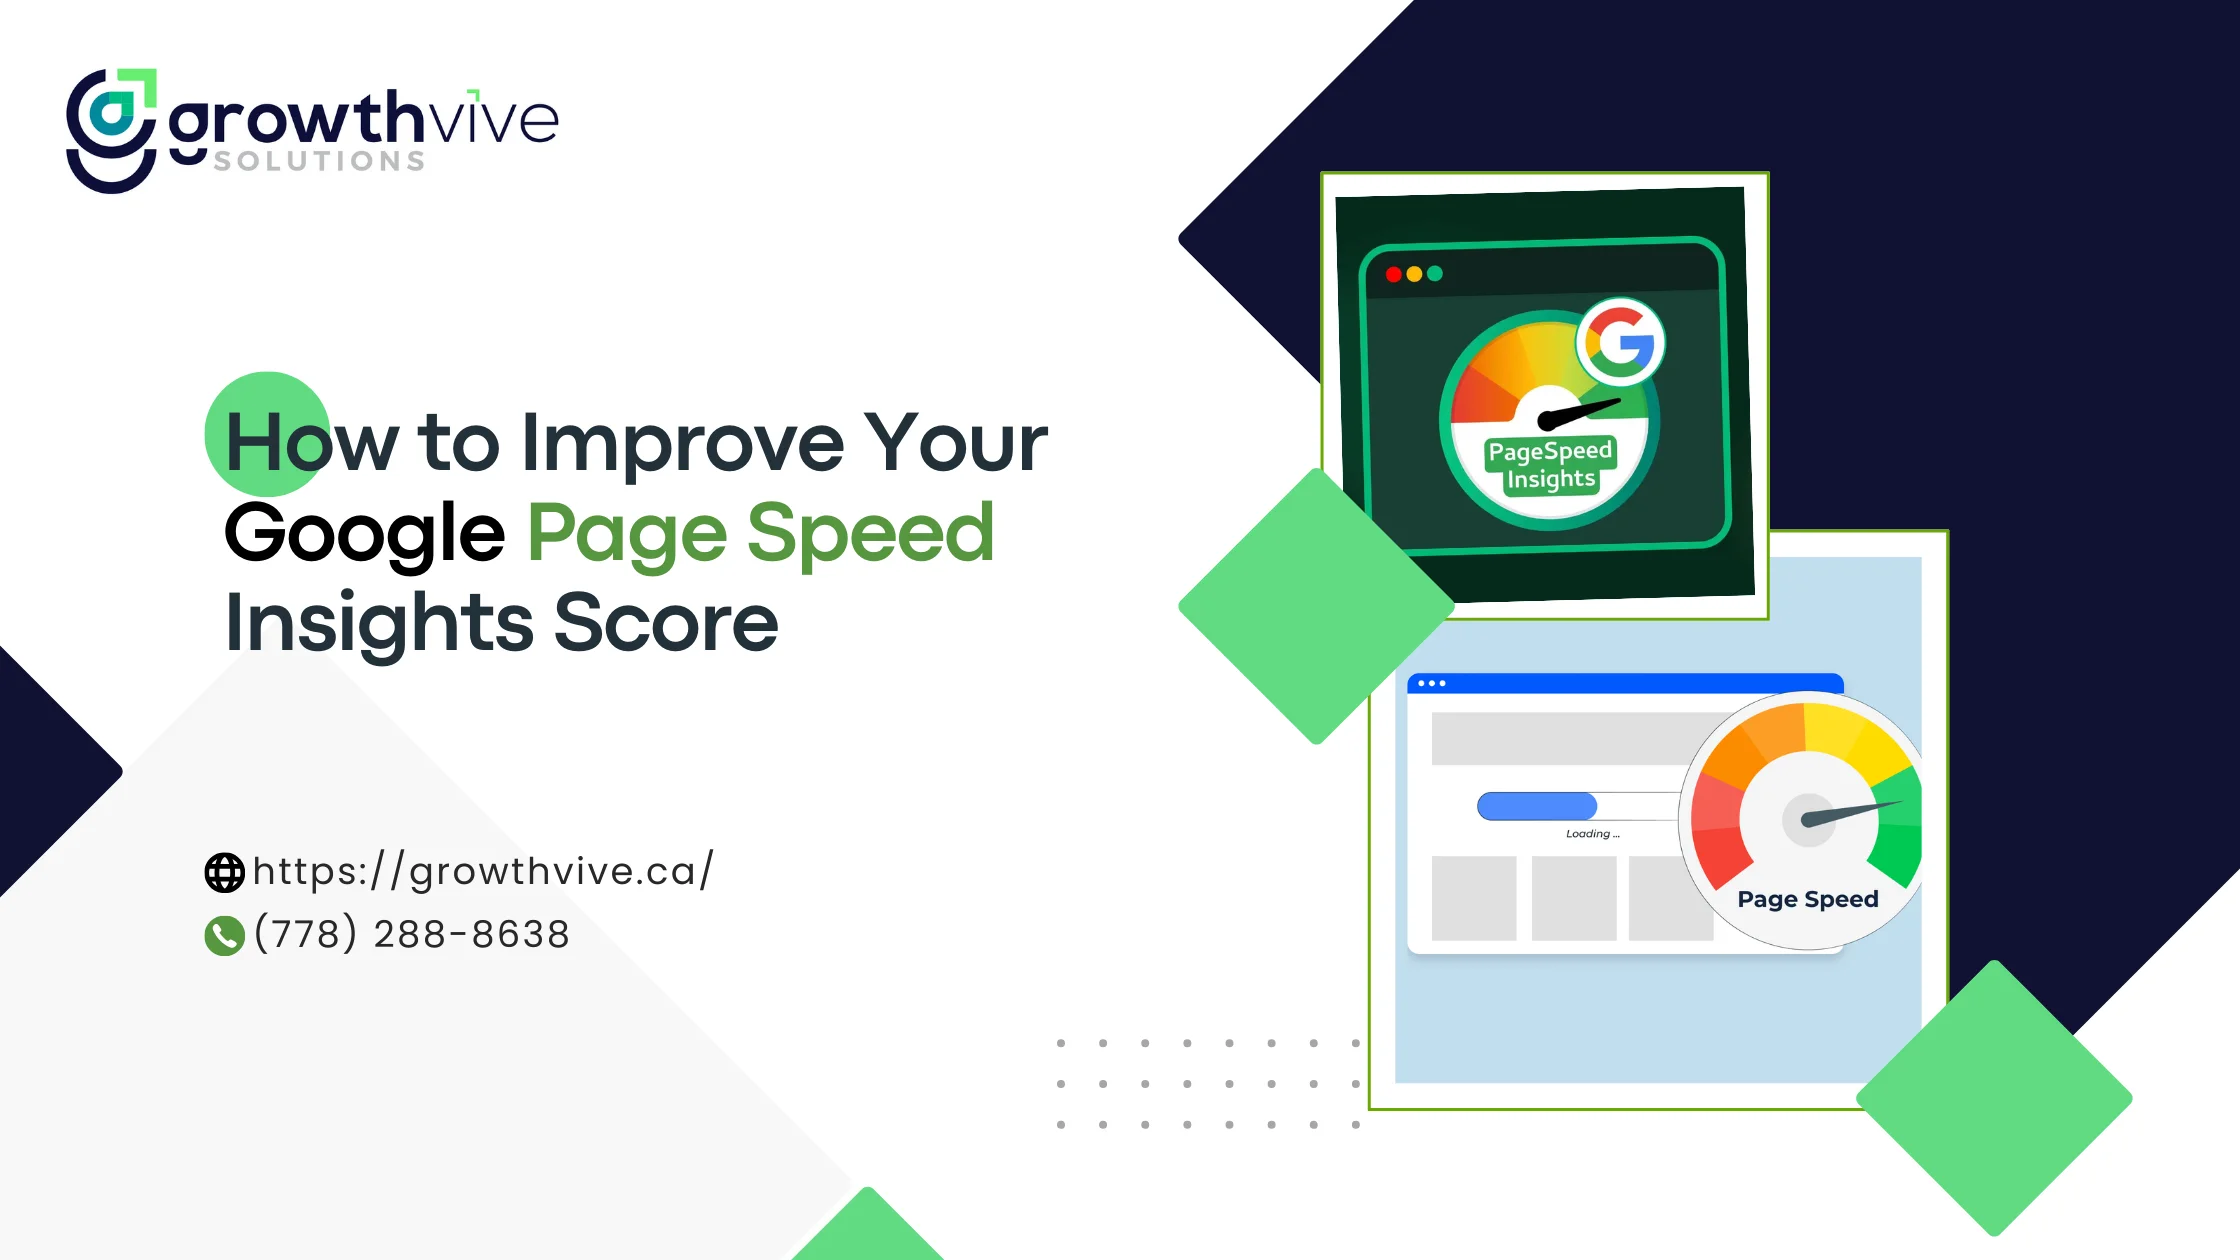 How to Improve Your Google PageSpeed Insights Score